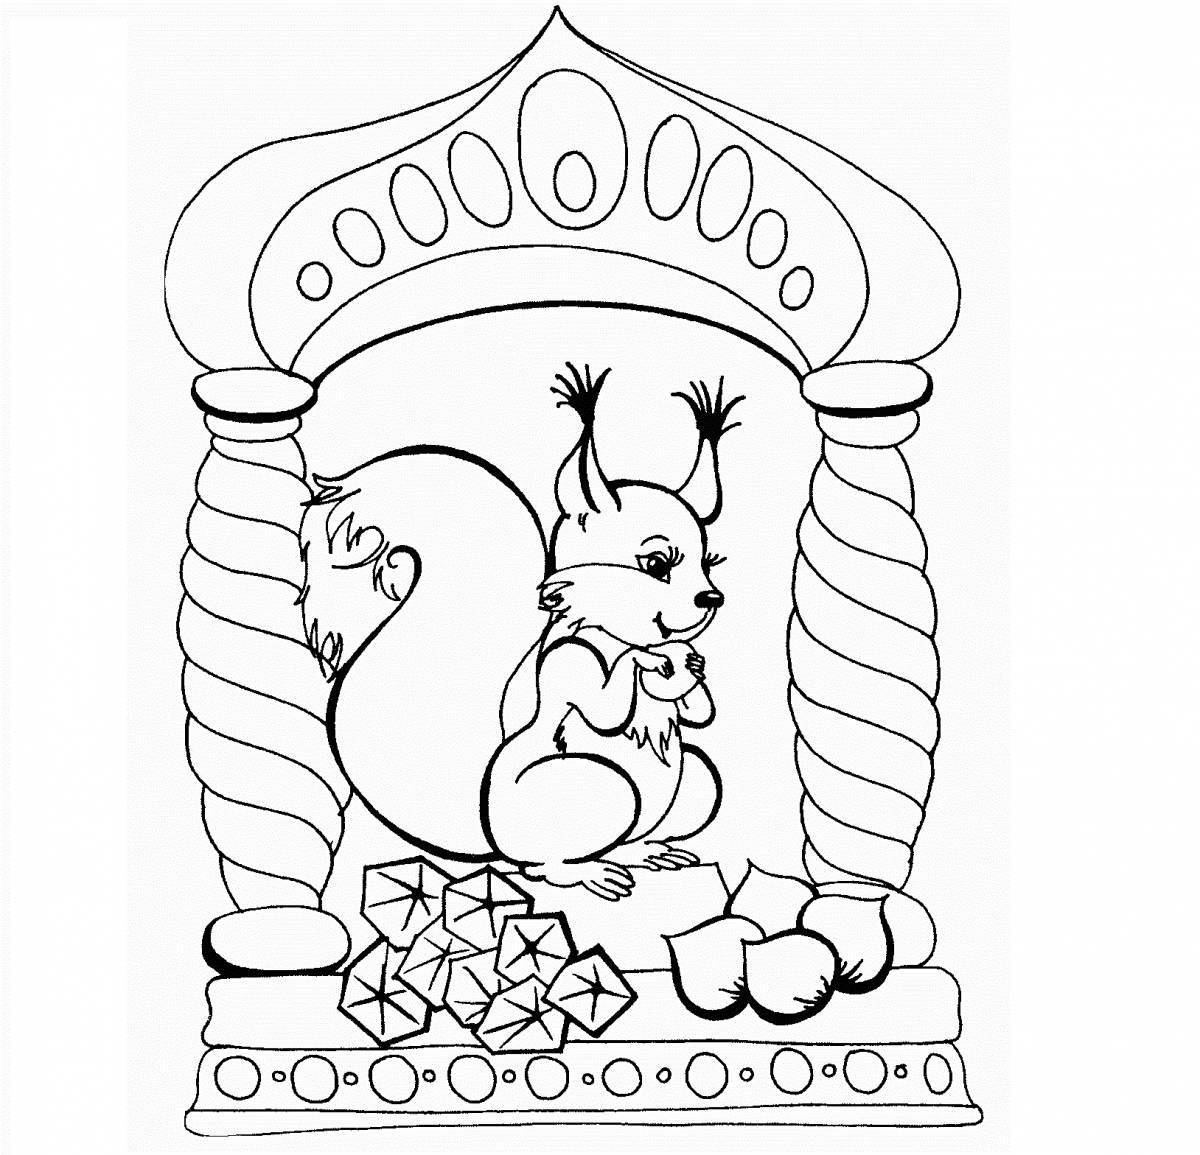 A cheerful coloring book for children 3-4 years old based on Pushkin's fairy tales